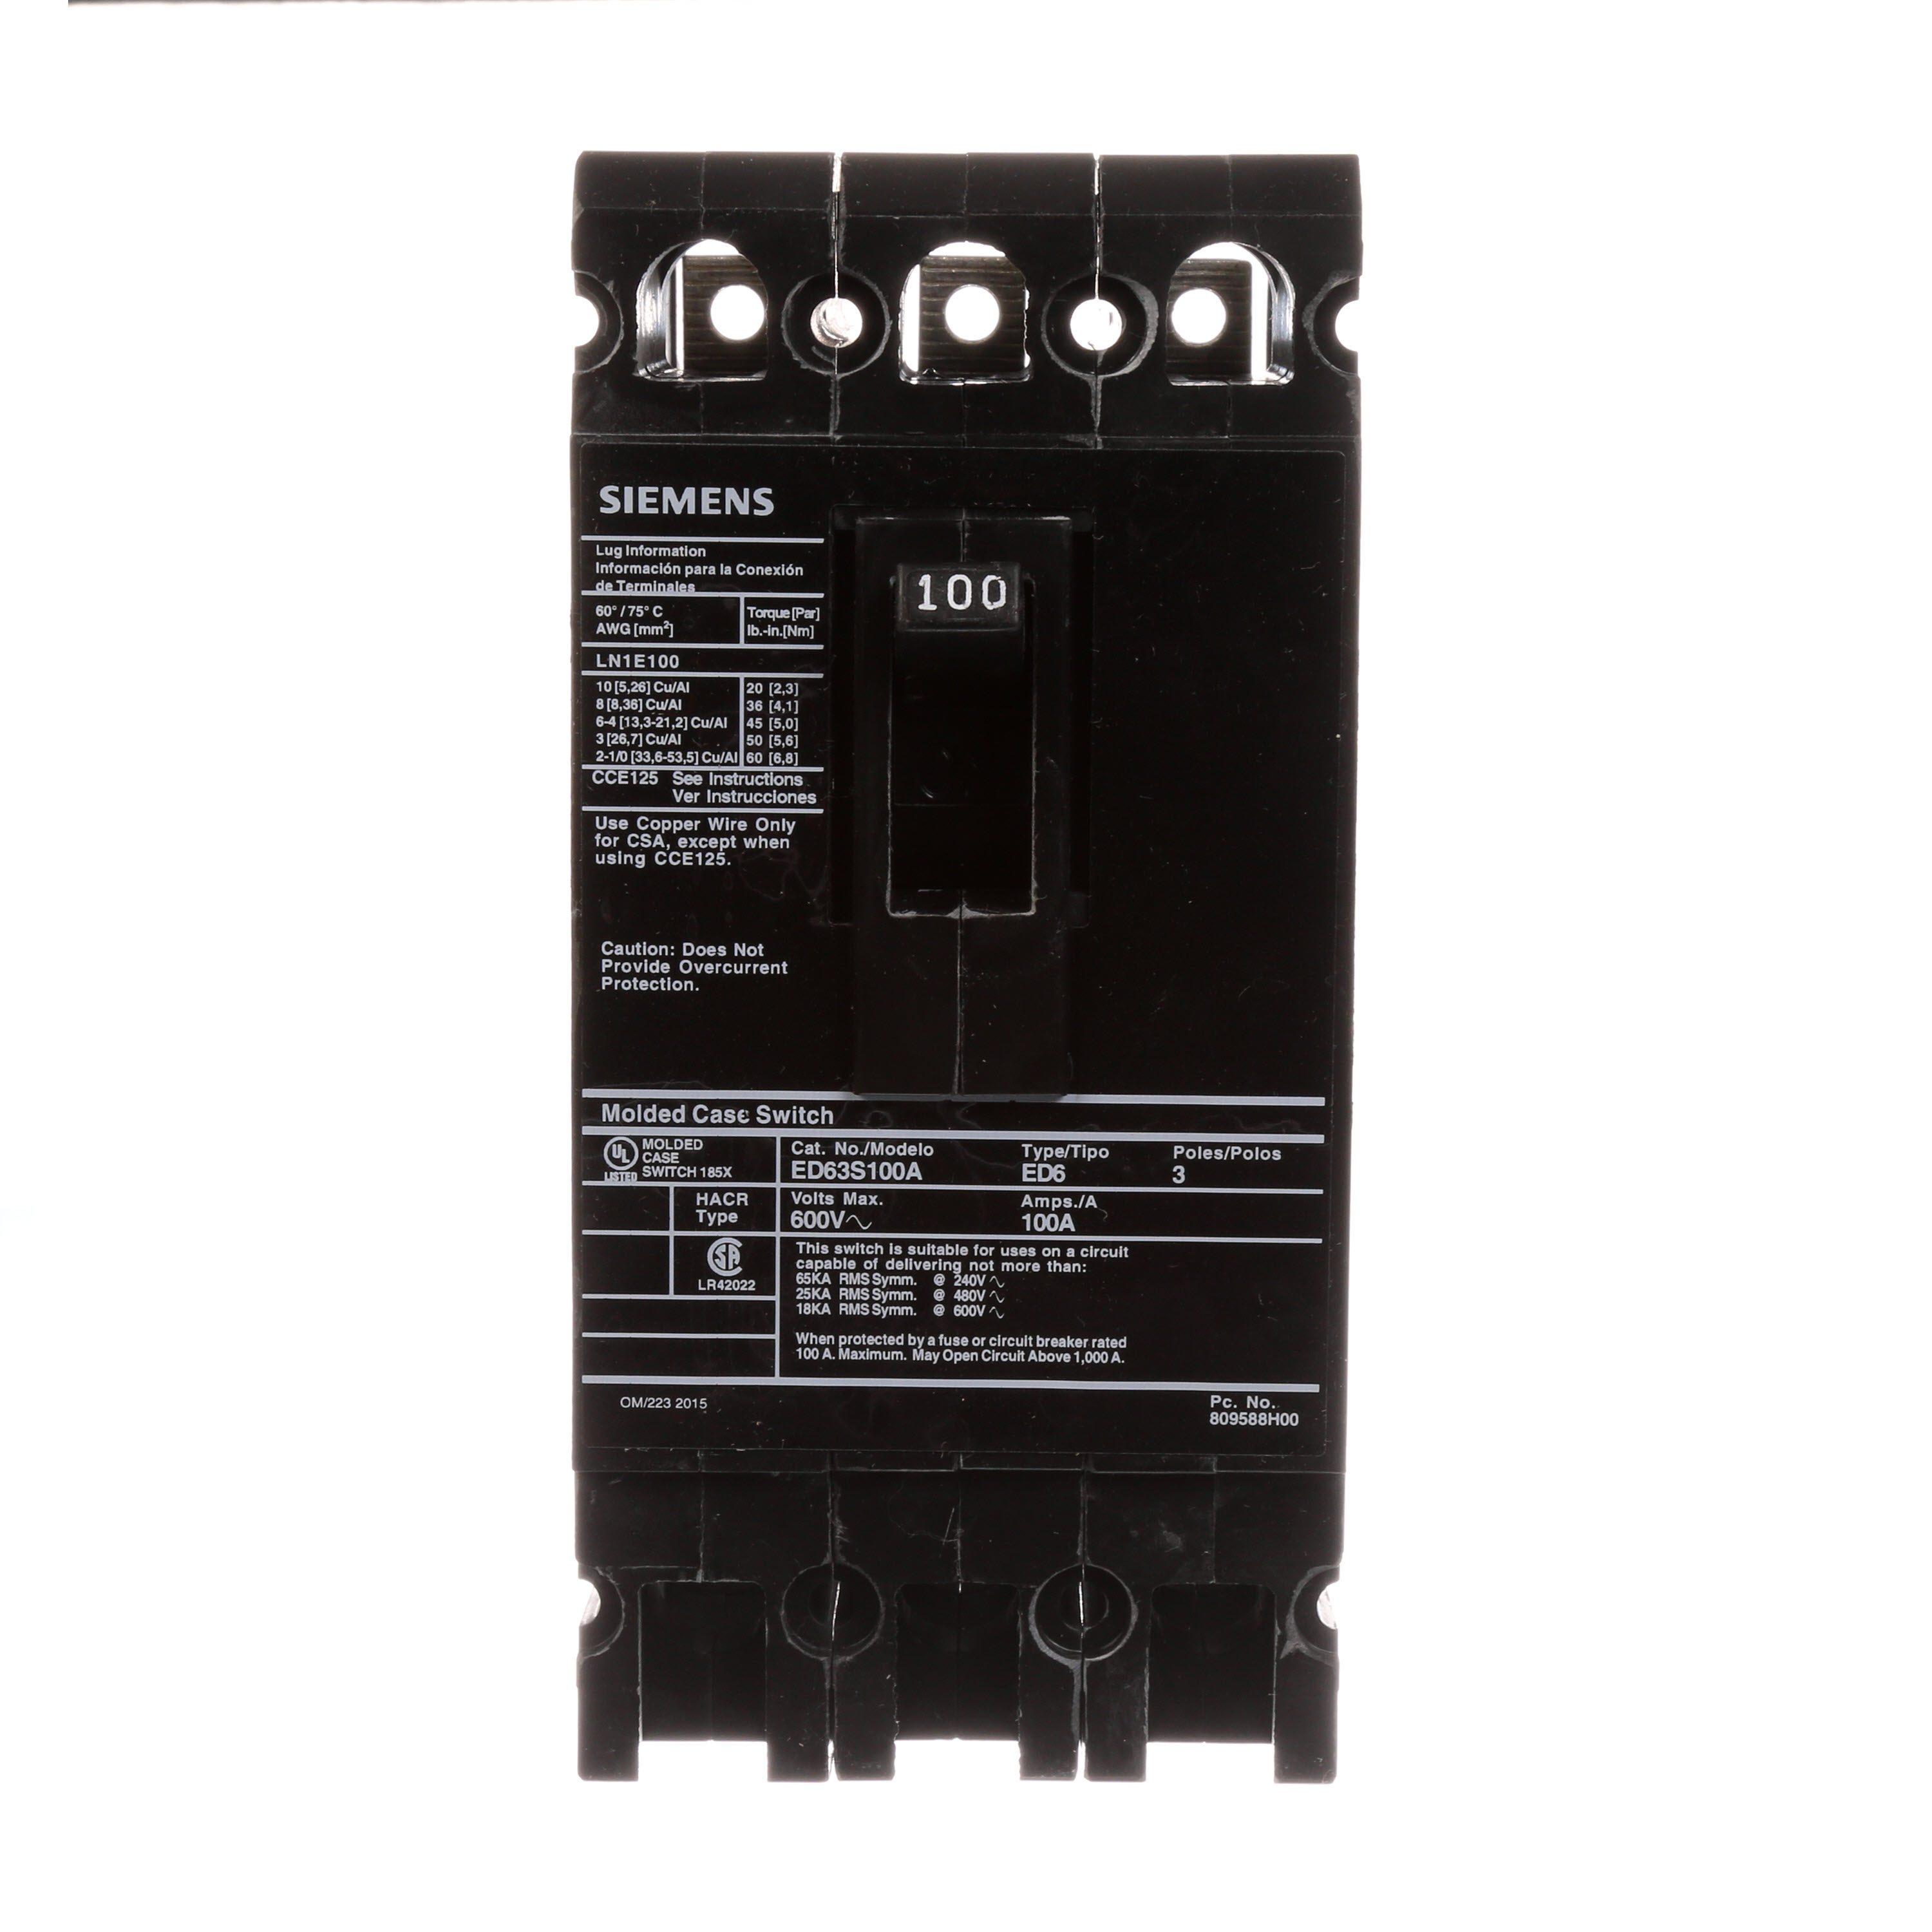 SIEMENS LOW VOLTAGE SENTRON MOLDED CASE CIRCUIT BREAKER WITH MAGNETIC ONLY TRIPUNIT. MOLDED CASE SWITCH (BREAKER) ED FRAME WITH STANDARD BREAKING CAPACITY. 100A 3-POLE 600V 1000A SELF-PROTECTIVE INSTANTANEOUS OVERRIDE. NON-INTERCHANGEABLETRIP UNIT. SPECIAL FEATURES LOAD LUGS ONLY (LN1E100) WIRE RANGE 10 - 1/0AWG (CU/AL). DIMENSIONS (W x H x D) IN 3.00 x 6.4 x 3.92.